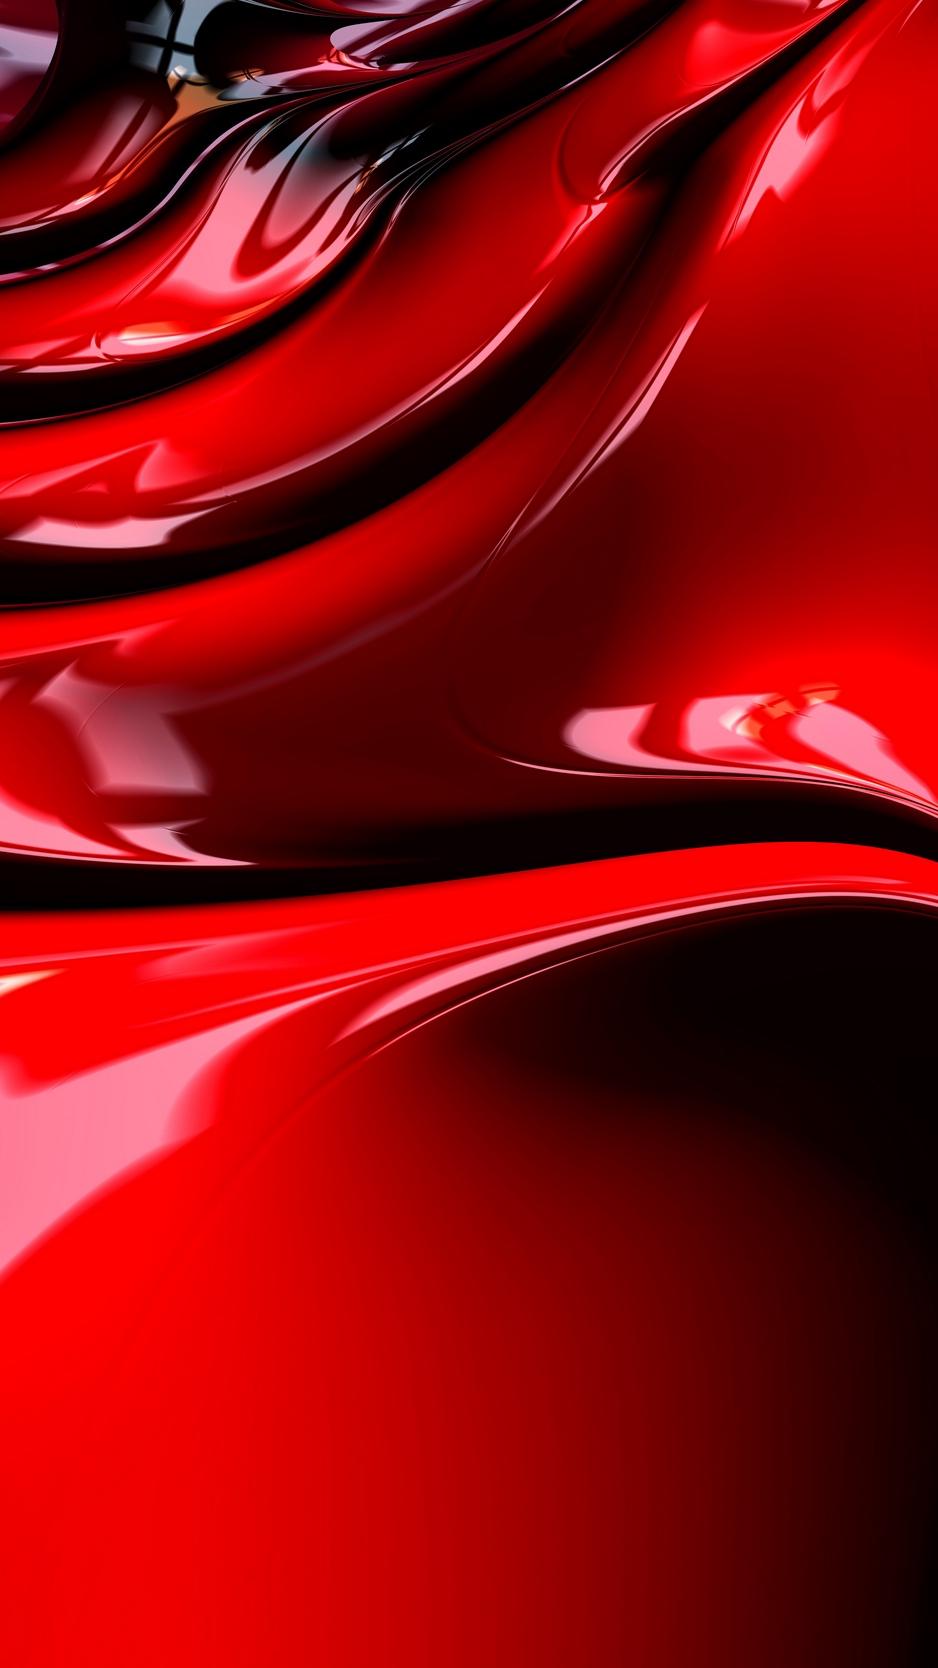 Download wallpapers 938x1668 fractal, structure, surface